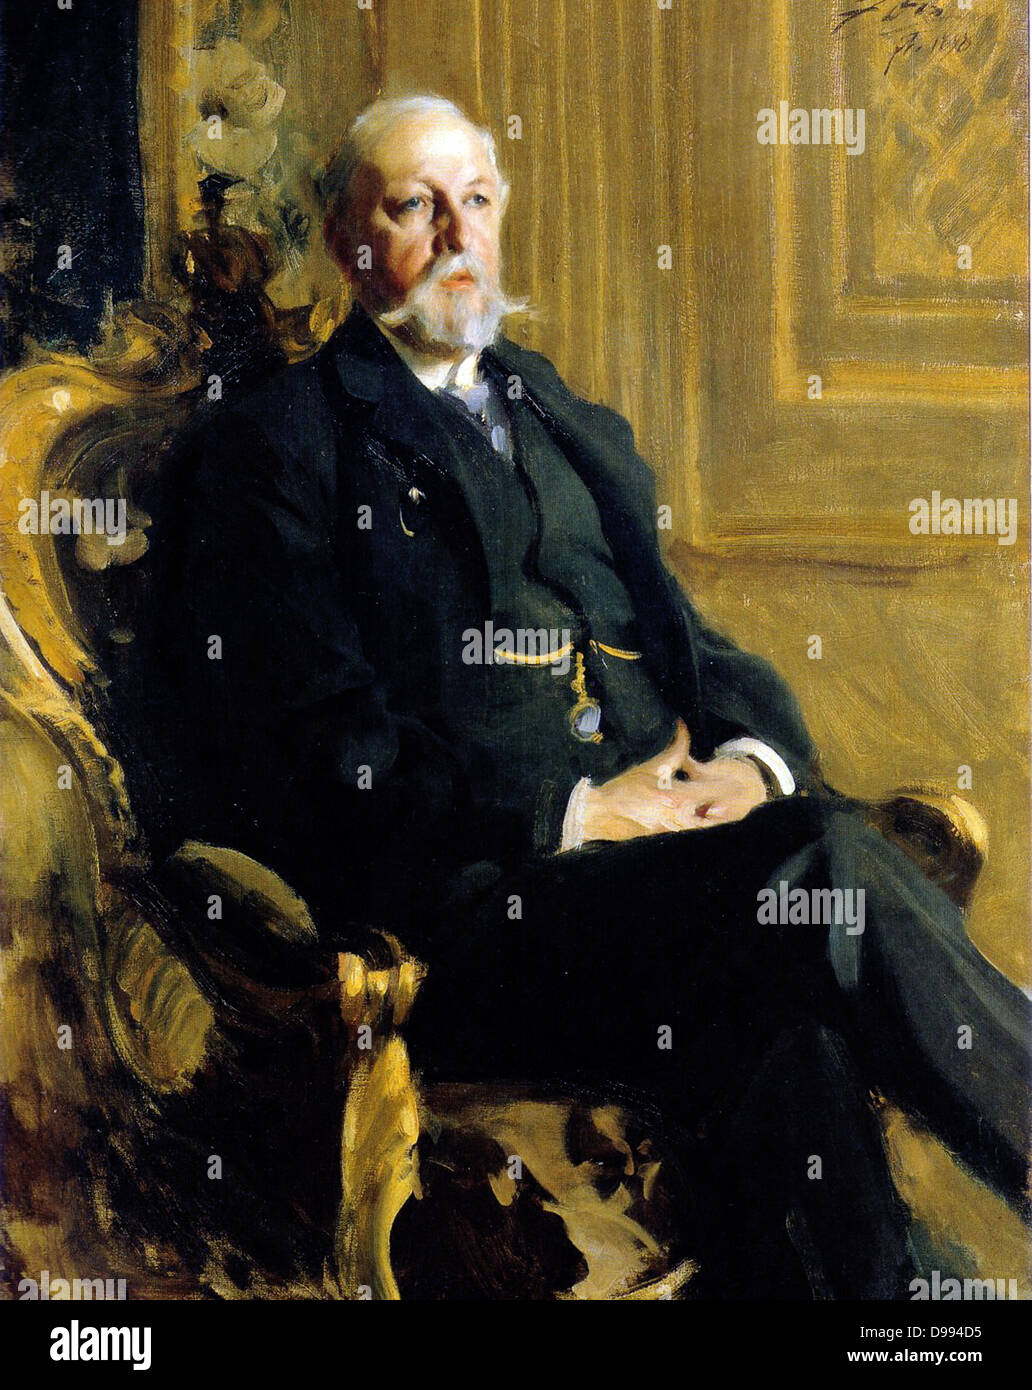 Oscar II (21 January 1829 – 8 December 1907), born Oscar Fredrik was King of Norway from 1872 until 1905 and King of Sweden from 1872 to 1907 Stock Photo